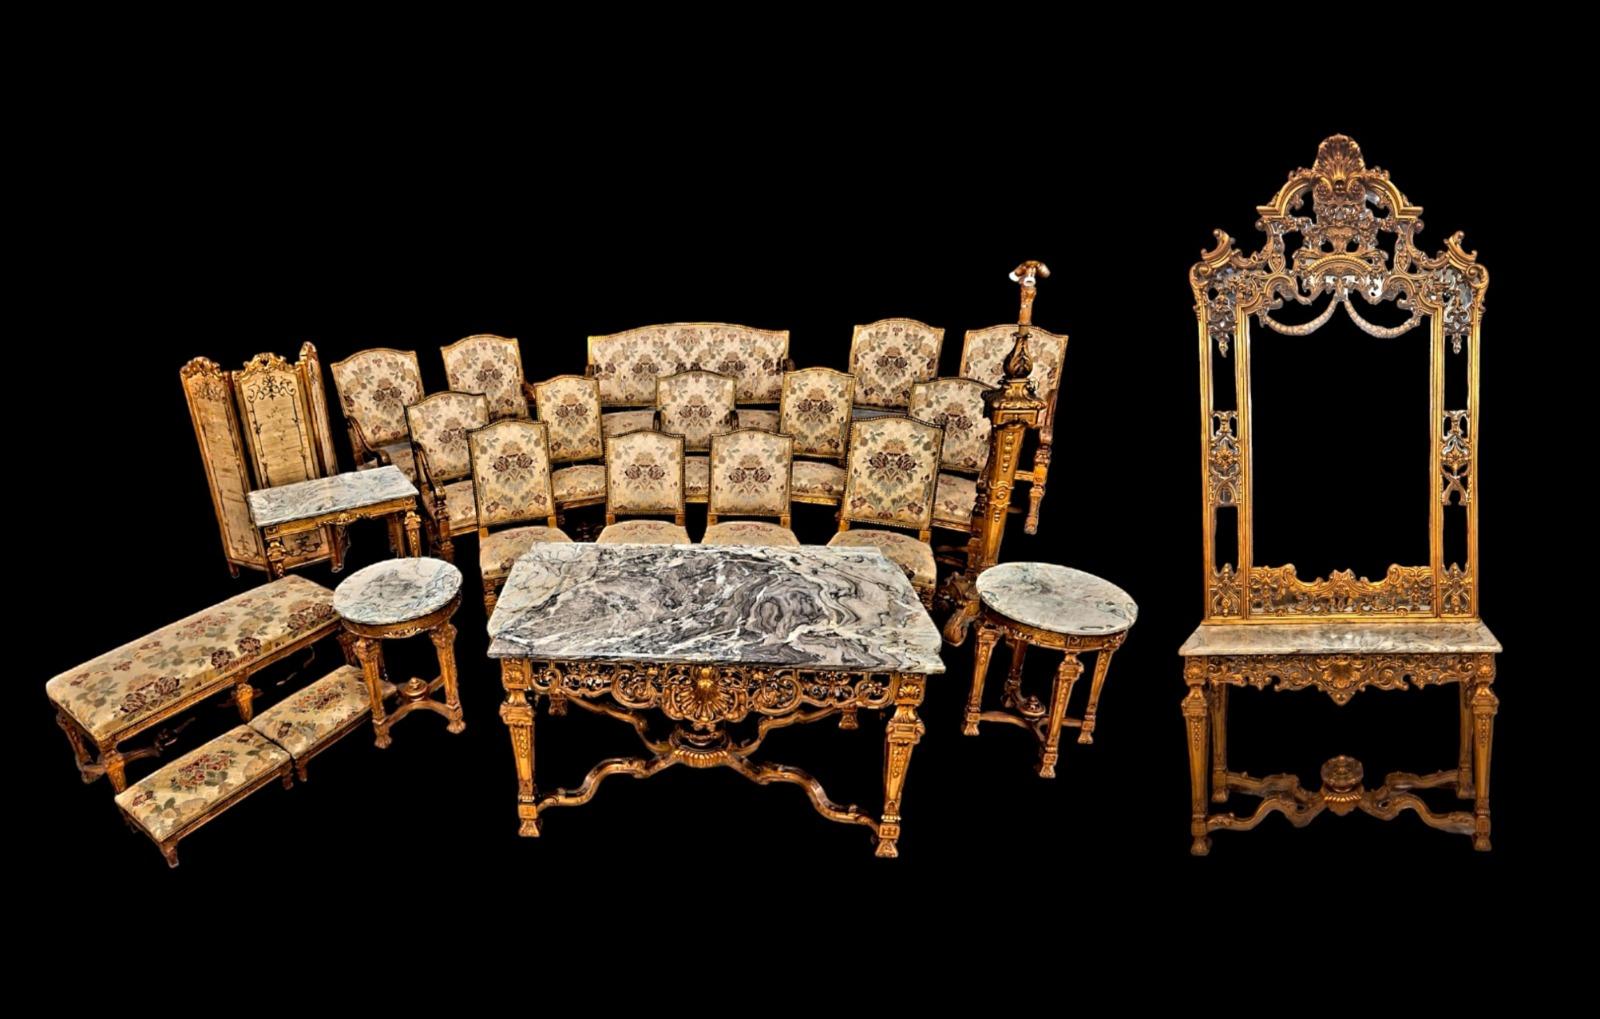 Guilded carved wood salon set in Louis XIV style